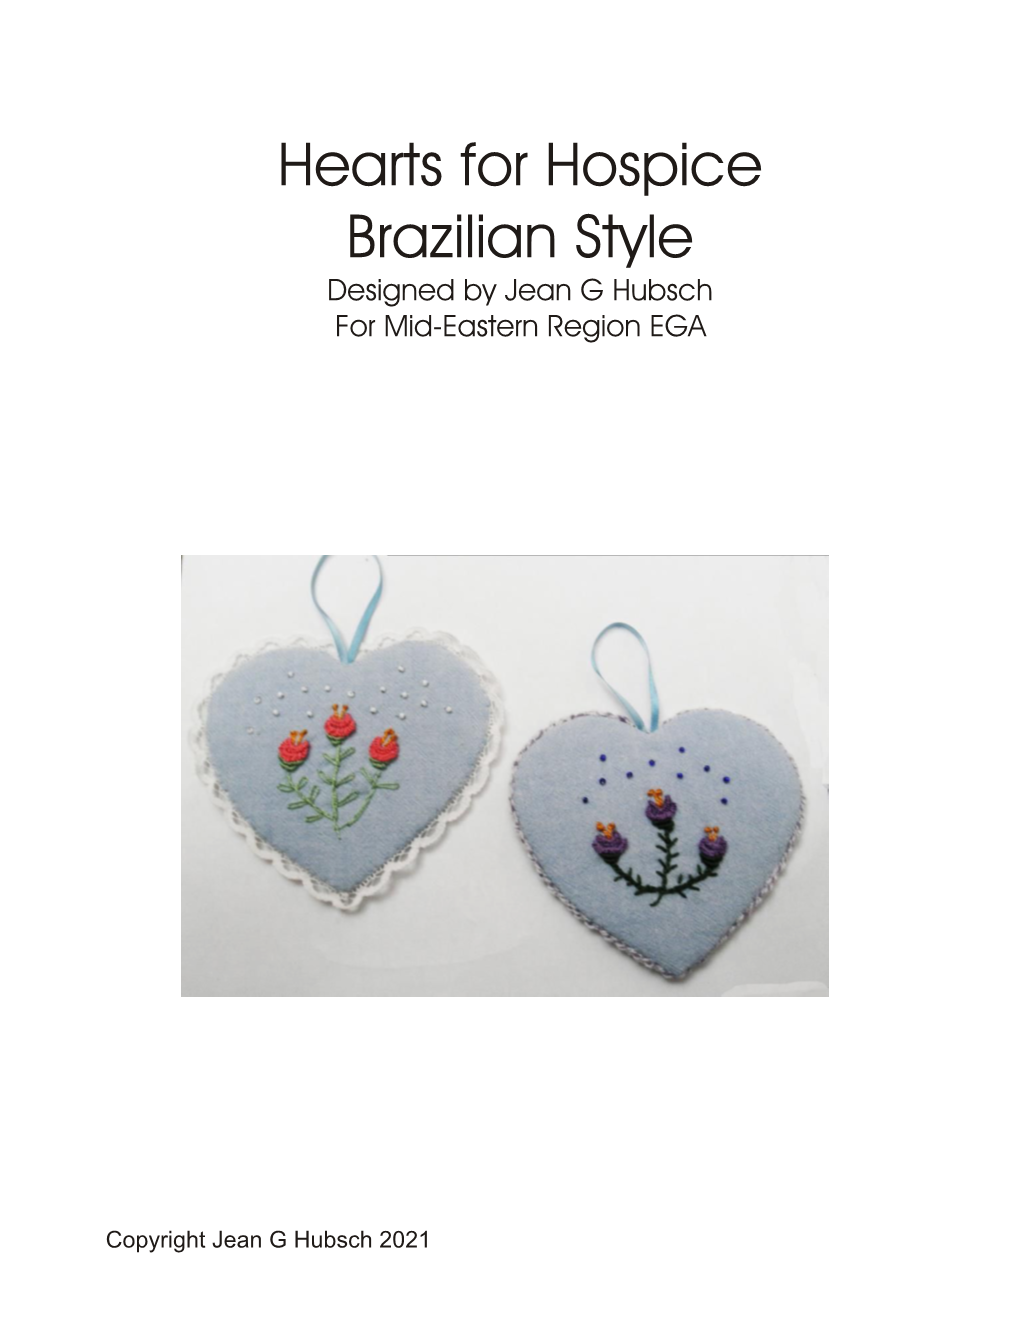 Hearts for Hospice Brazilian Style Designed by Jean G Hubsch for Mid-Eastern Region EGA